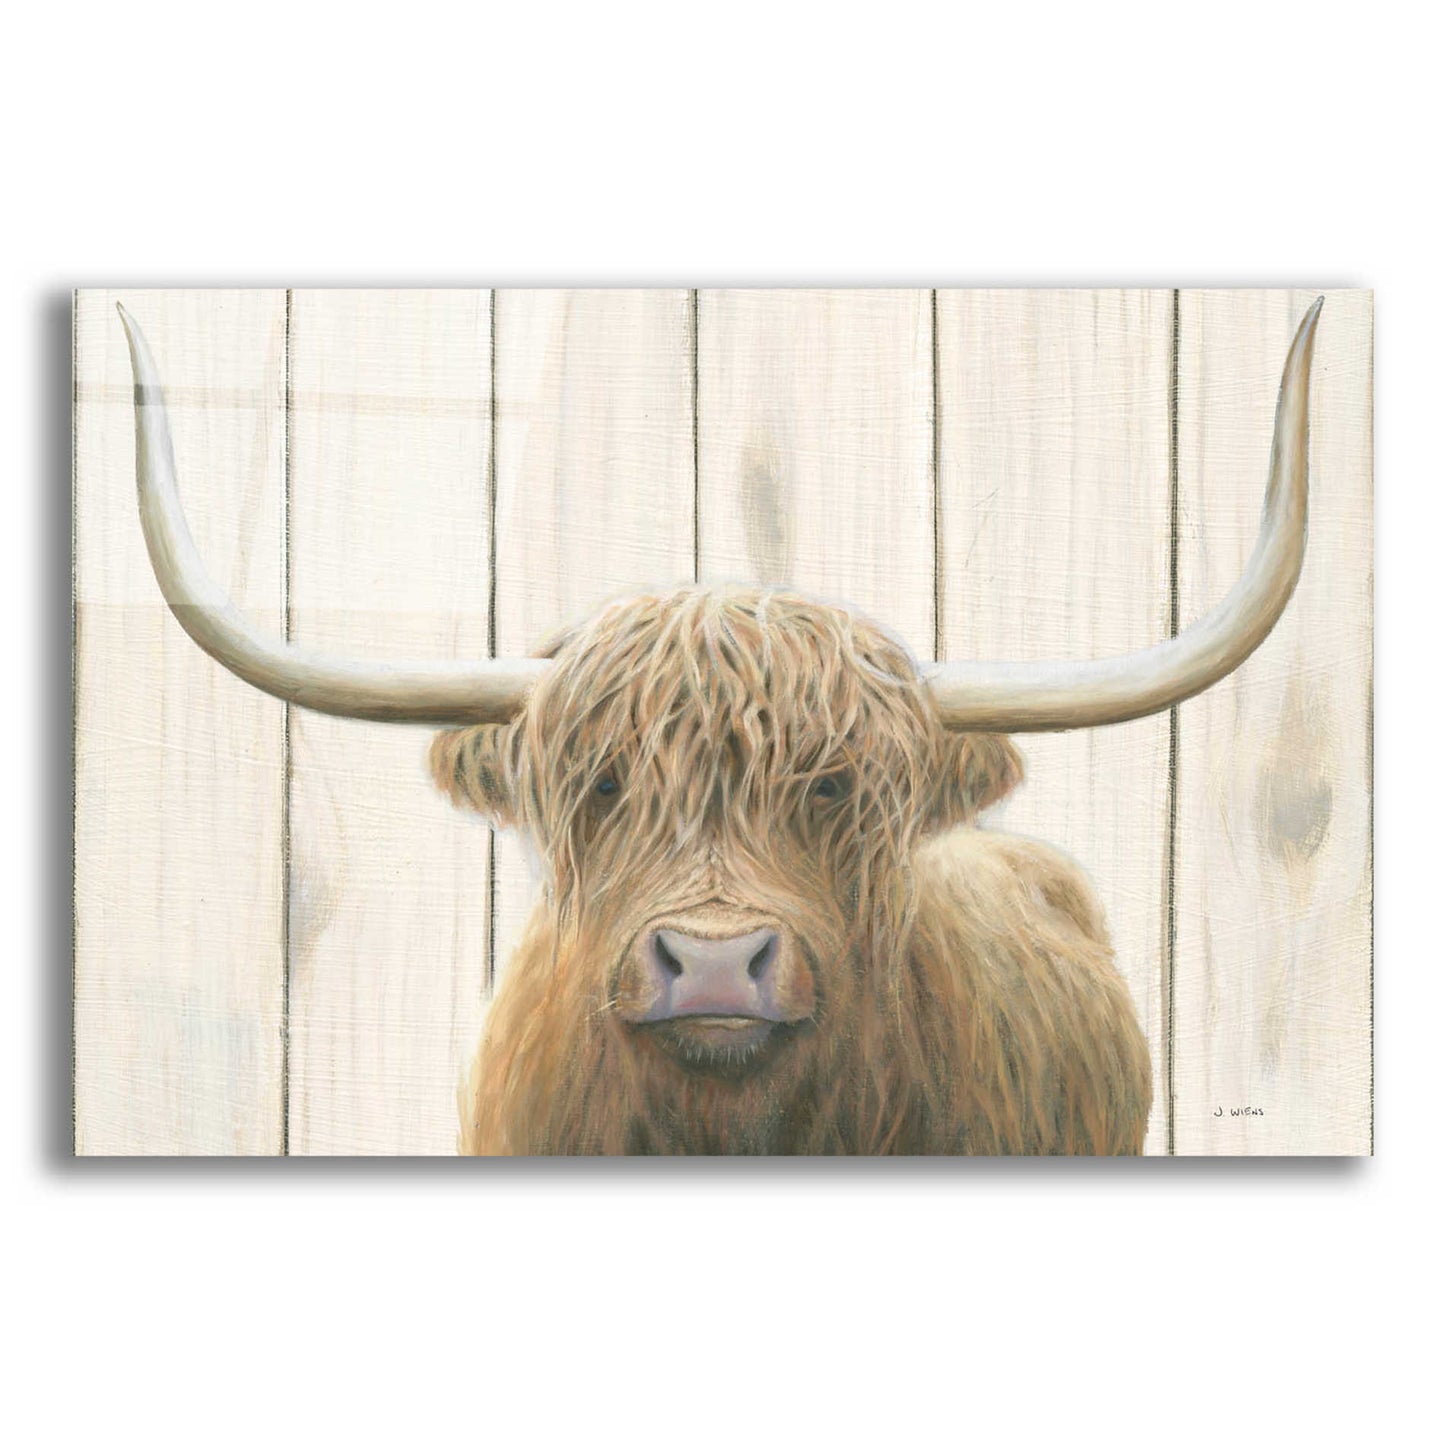 Epic Art 'Highland Cow Shiplap' by James Wiens, Acrylic Glass Wall Art,18x12x1.1x0,26x18x1.1x0,40x26x1.74x0,60x40x1.74x0